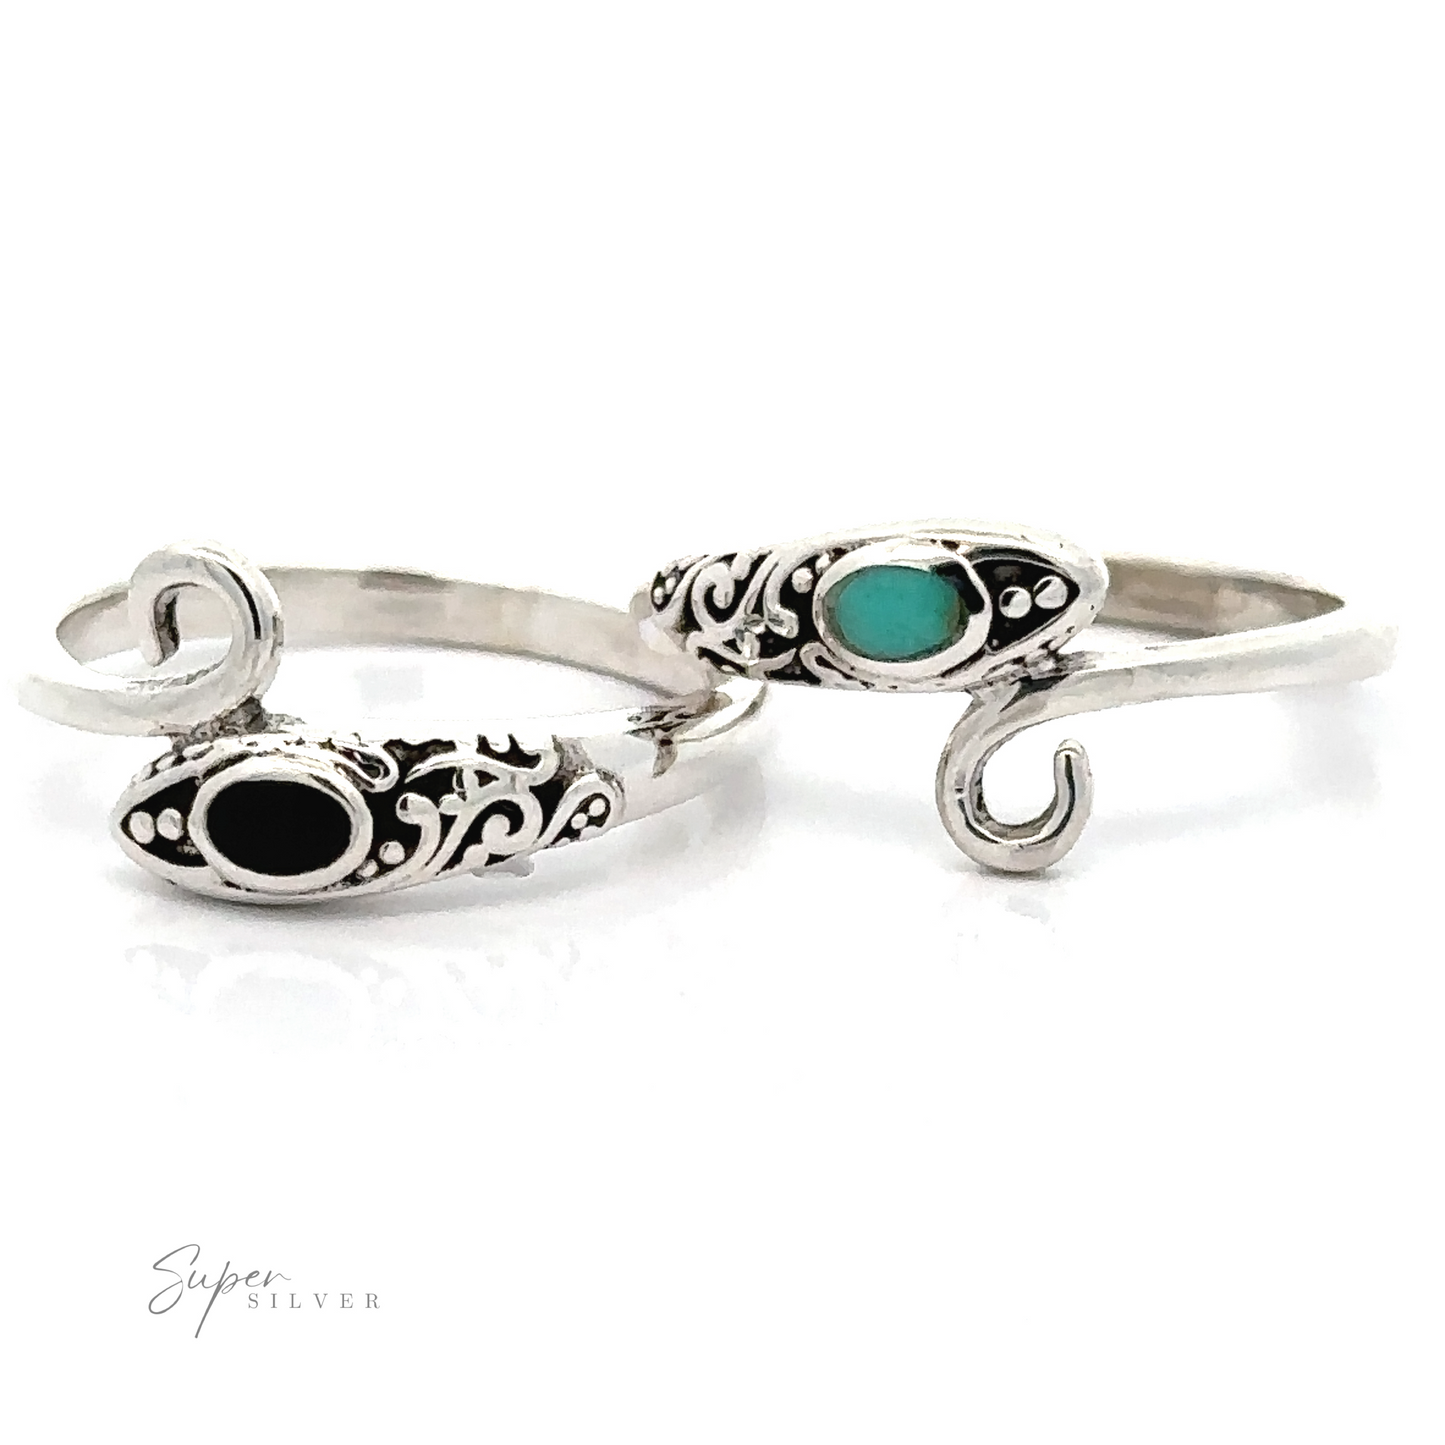 A pair of Inlay Stone Snake Rings with filigree designs.